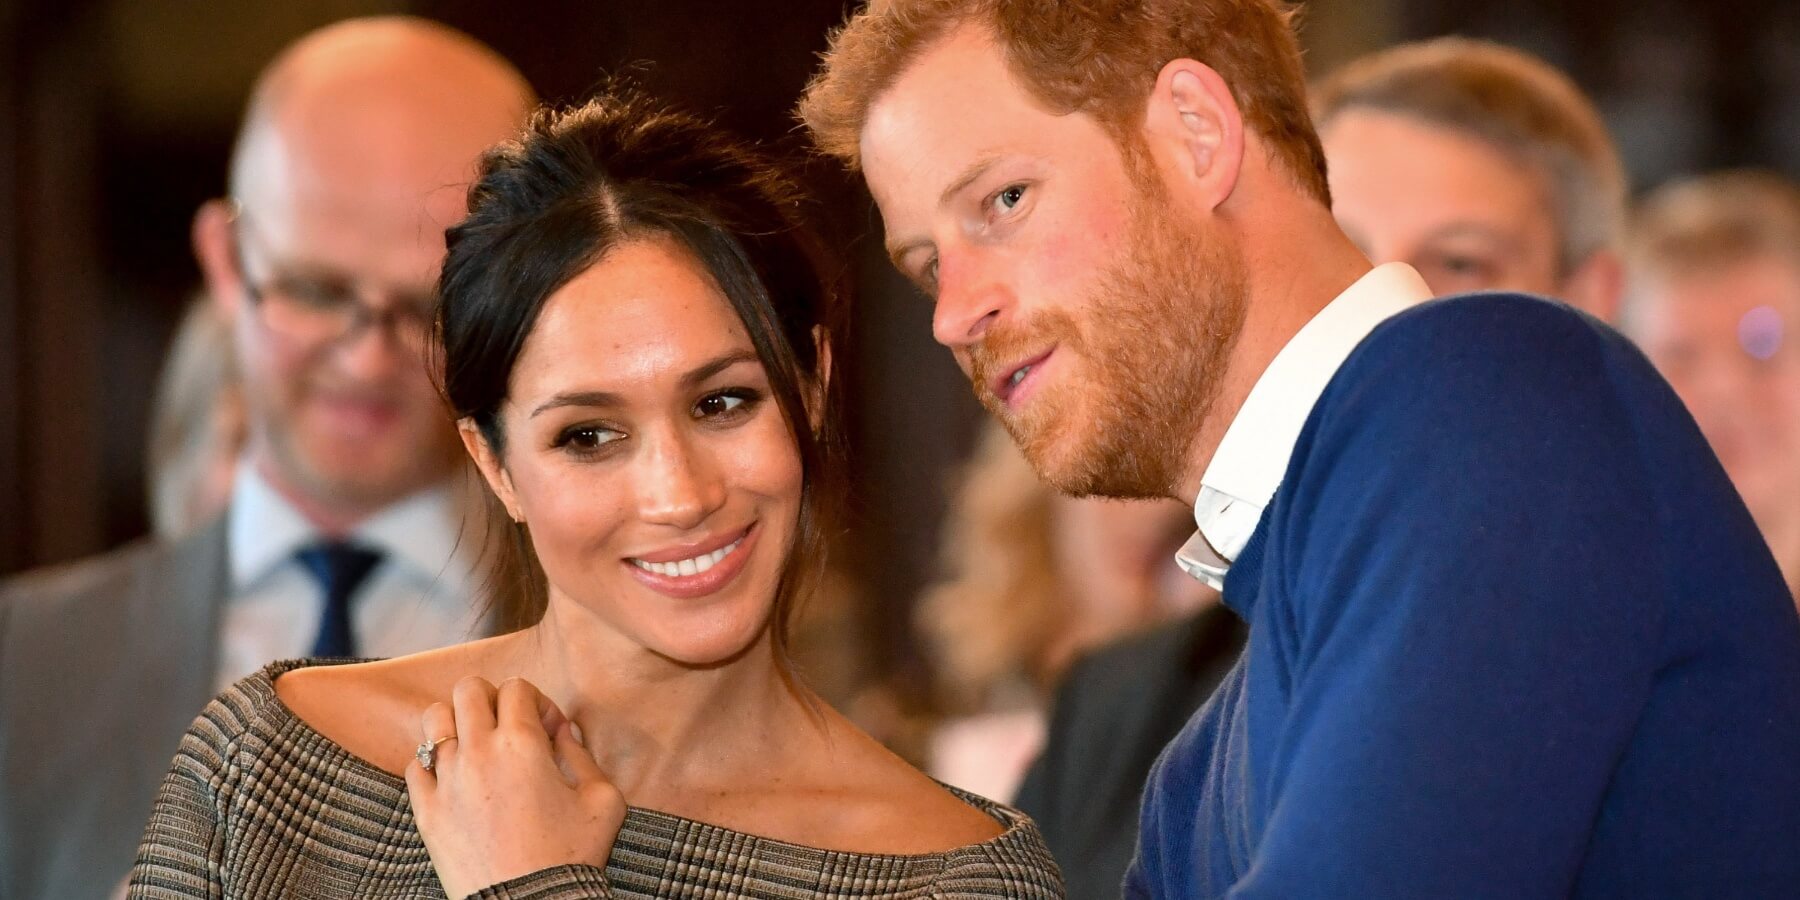 Meghan Markle and Prince Harry photographed in 2018 when they were still working royals.